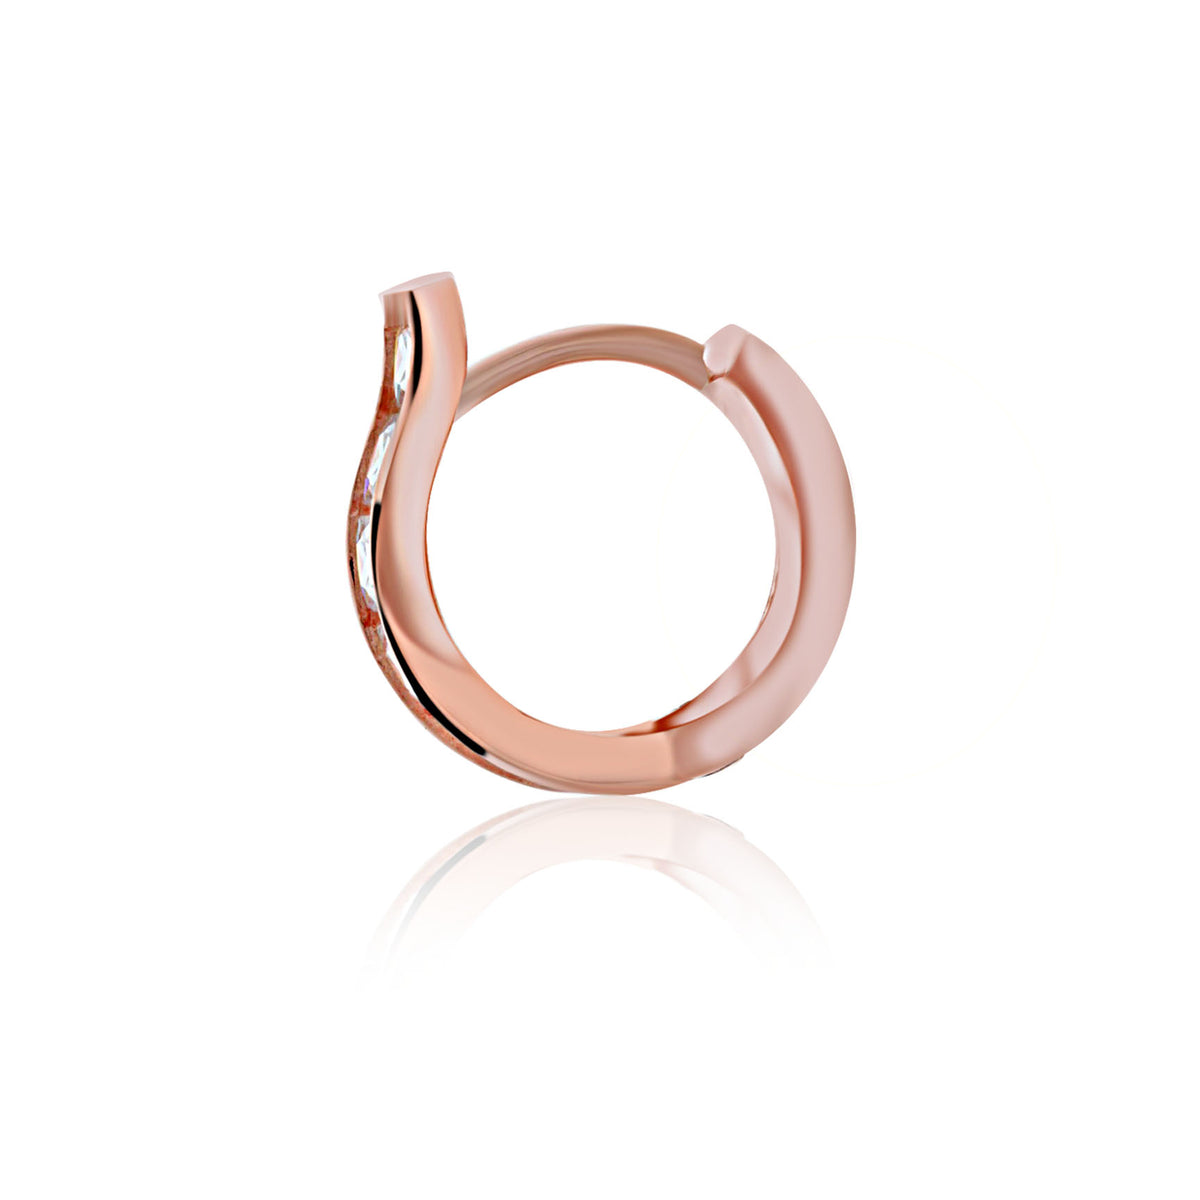 Rose Gold Plated Channel Set Cz Huggie Earrings